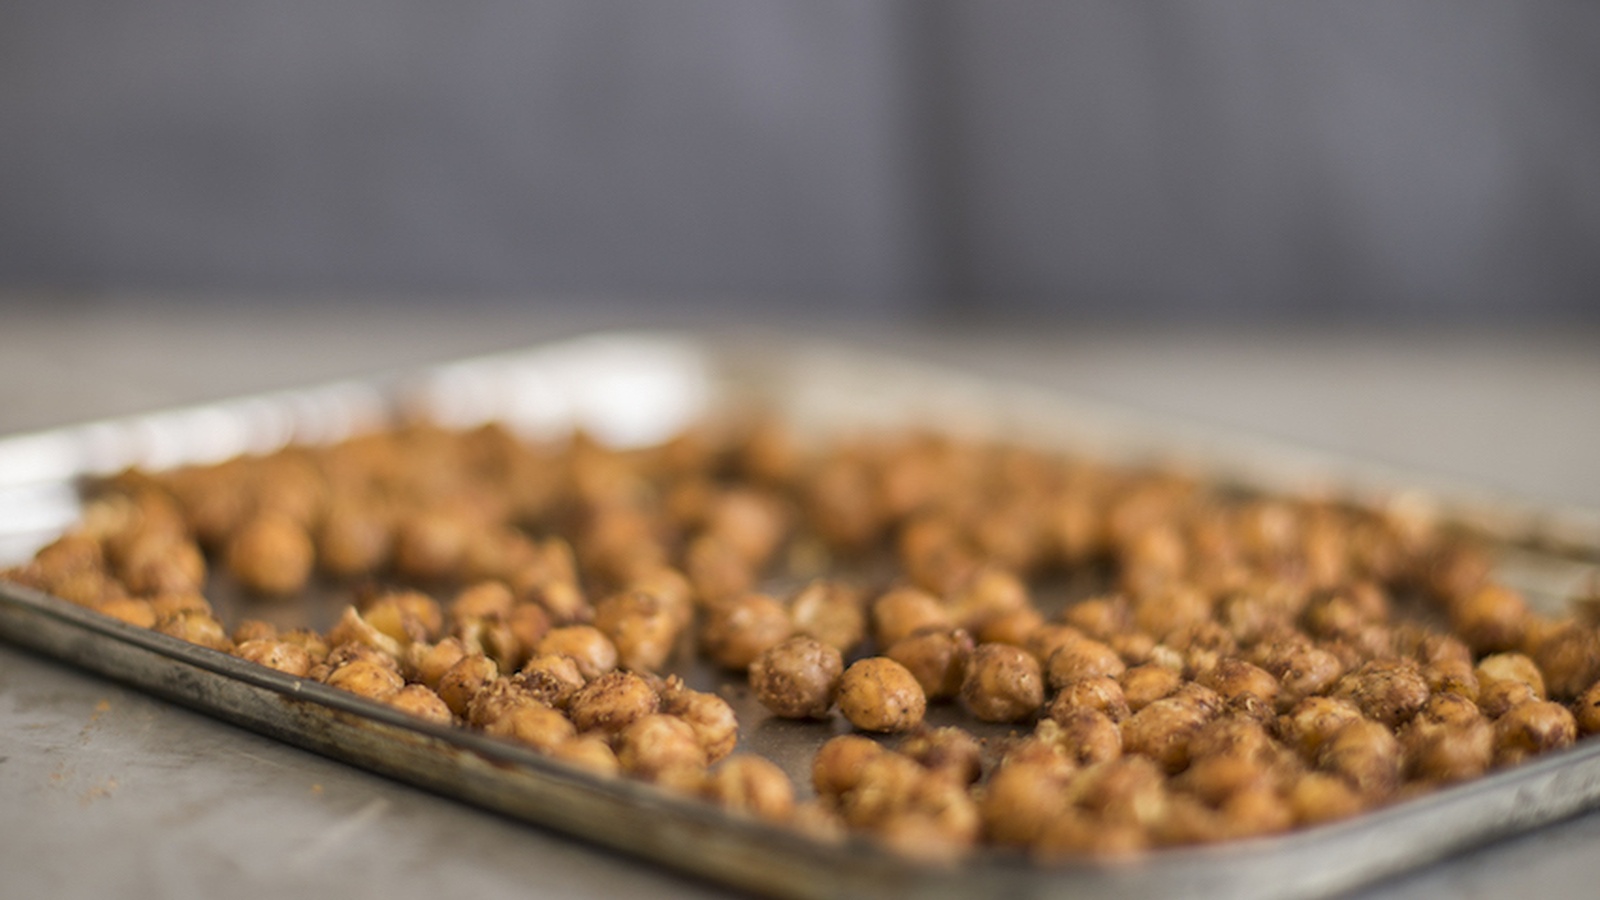 How to Make Crunchy, Roasted Chickpeas Using Healing Herbs And Flavors